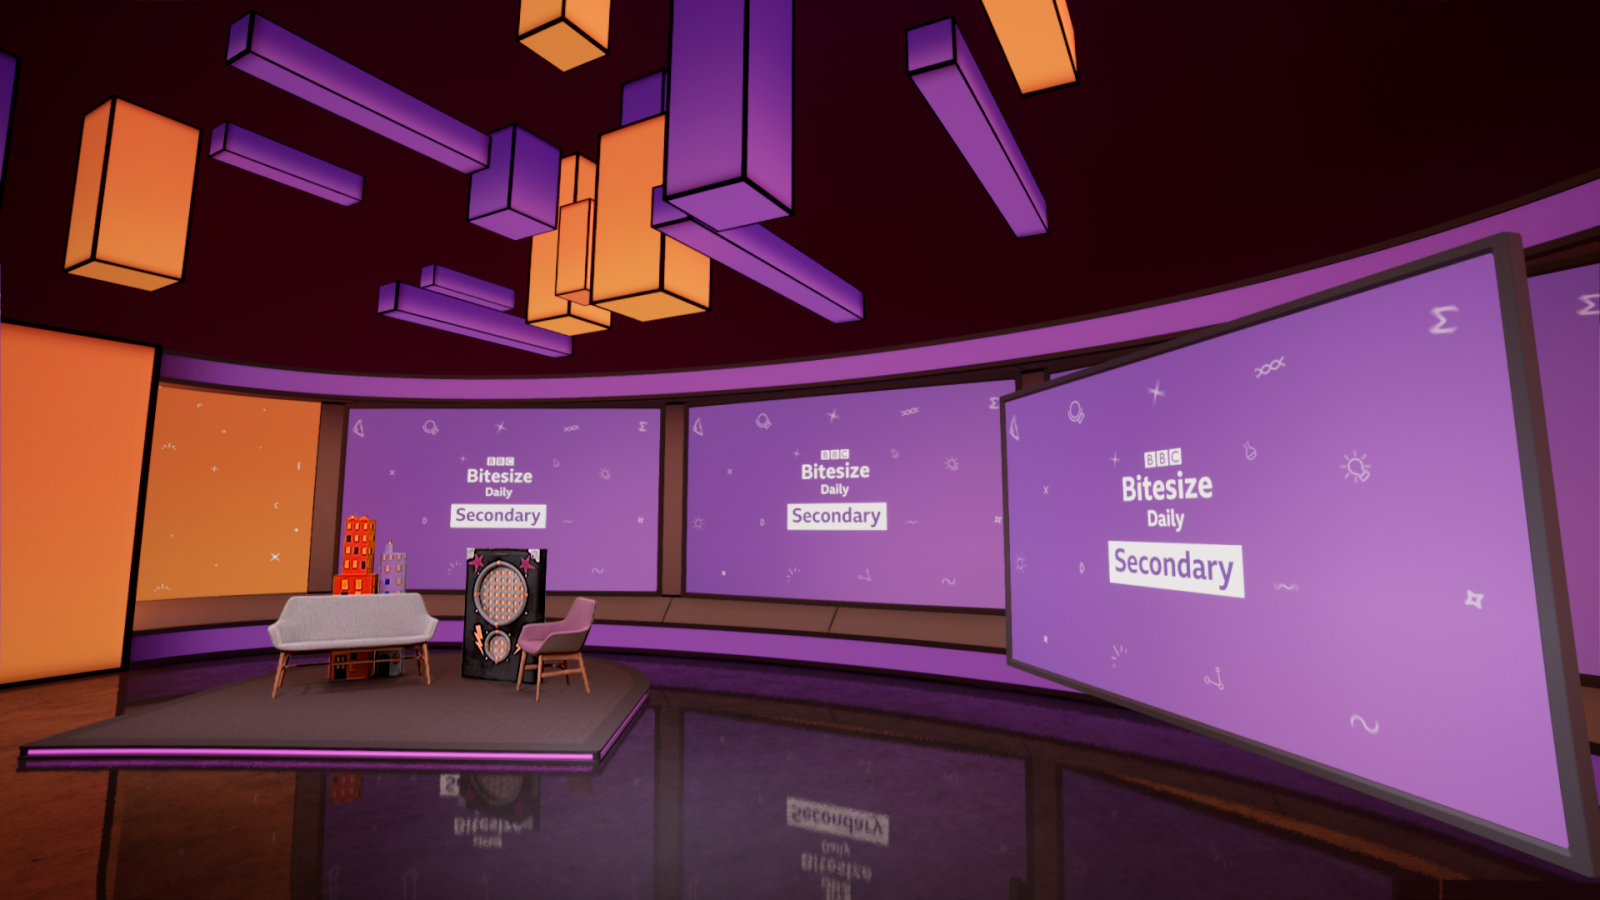 Bbc Launch New Virtual Learning Service For Children Bitesize Daily